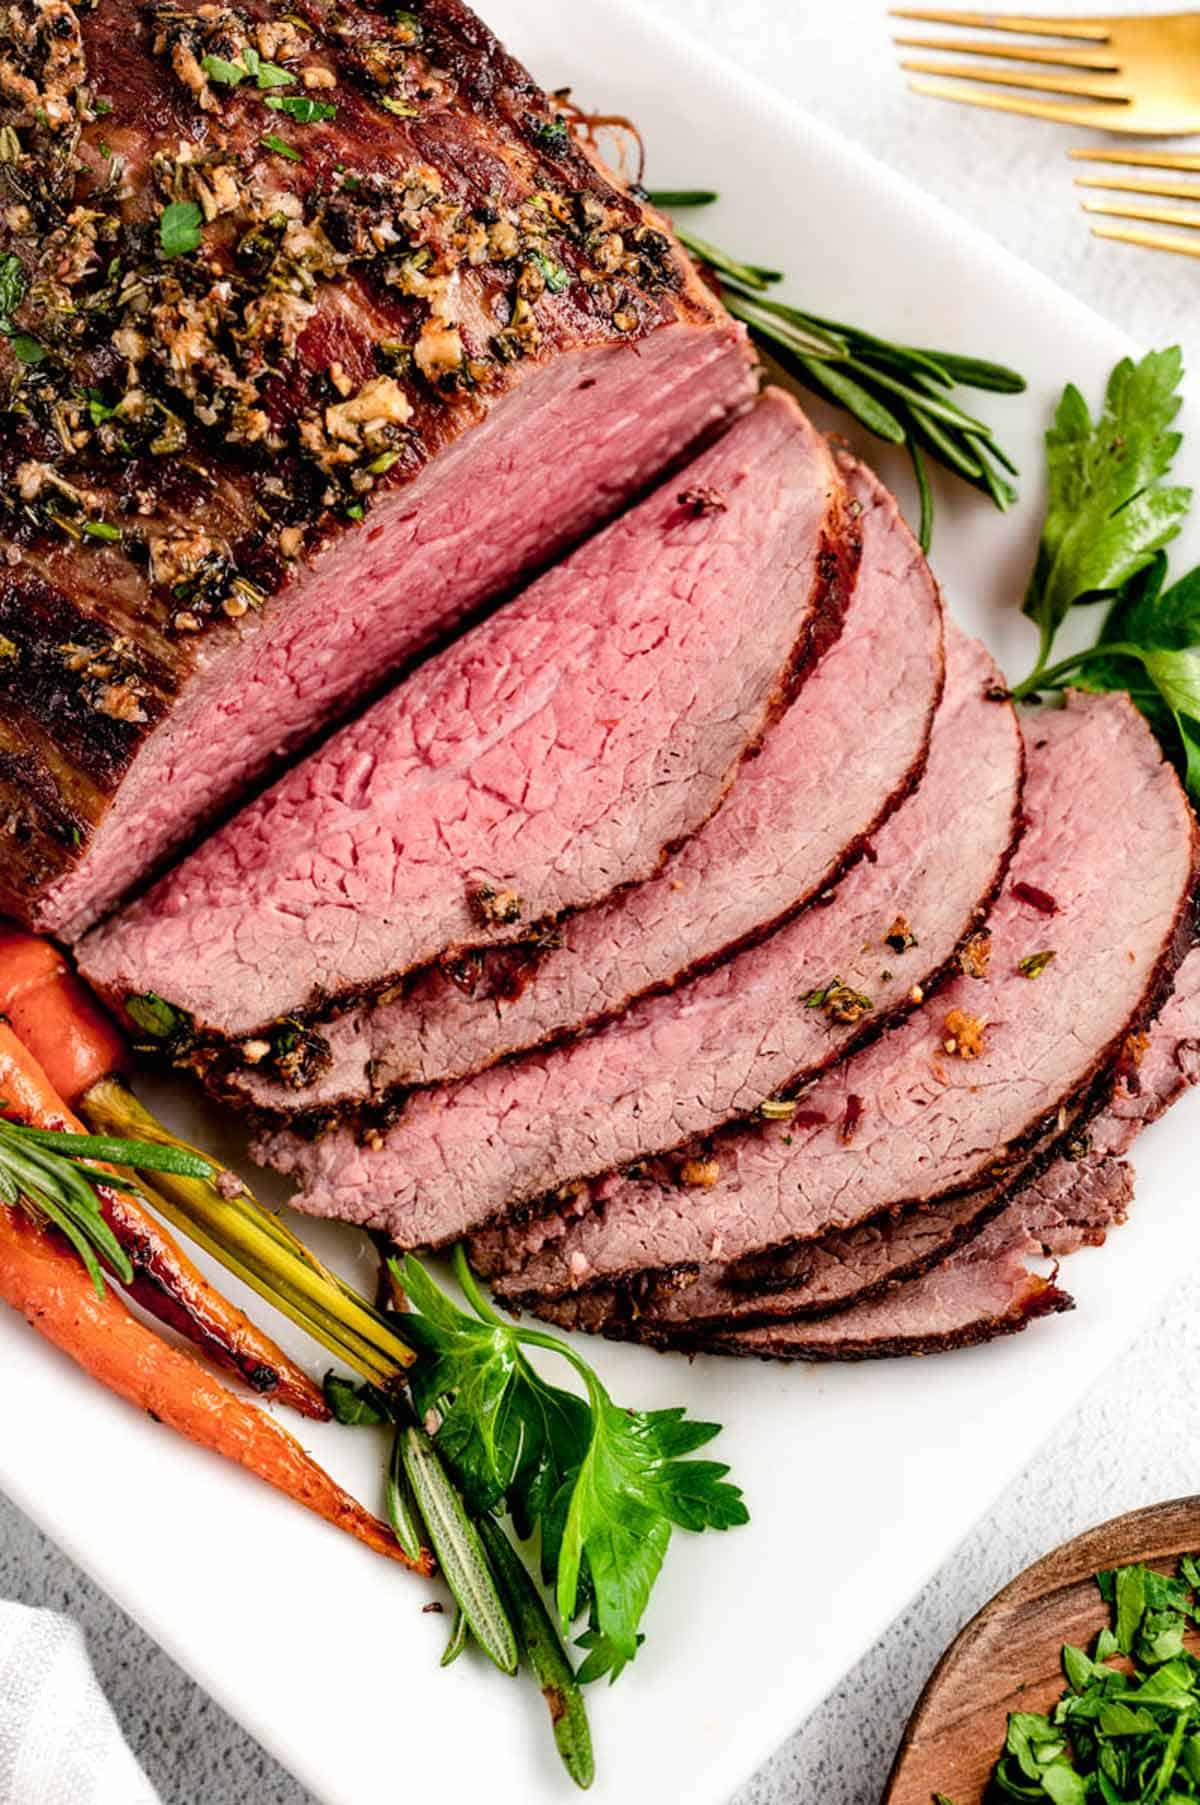 Slices cut out of a whole Christmas roast beef with roasted carrots on the side.